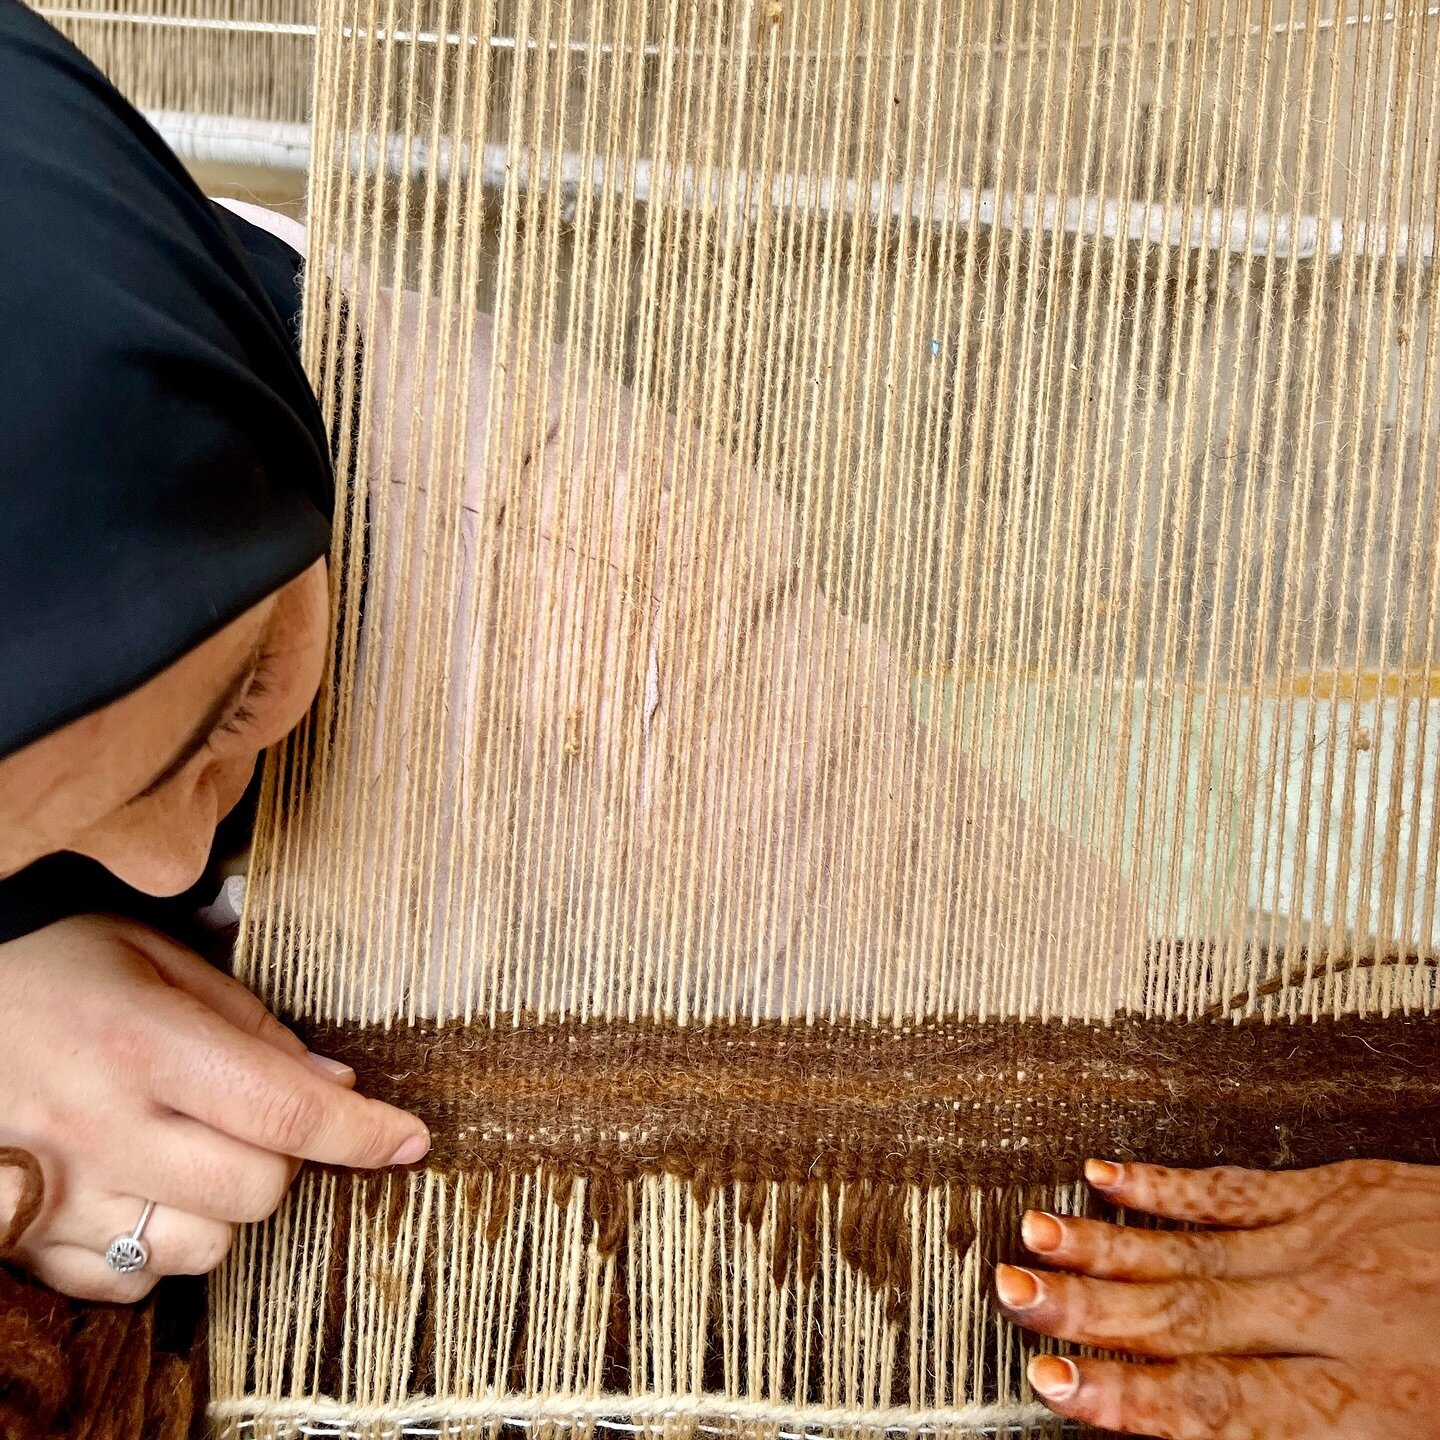 Talasin, meaning &ldquo;woven tales&rdquo; in the Amazigh language, encapsulates the commitment to reviving and fostering long forgotten heritage weaves, natural dyeing techniques and design practices respectful of the local culture.
.
.
.
#talasin #